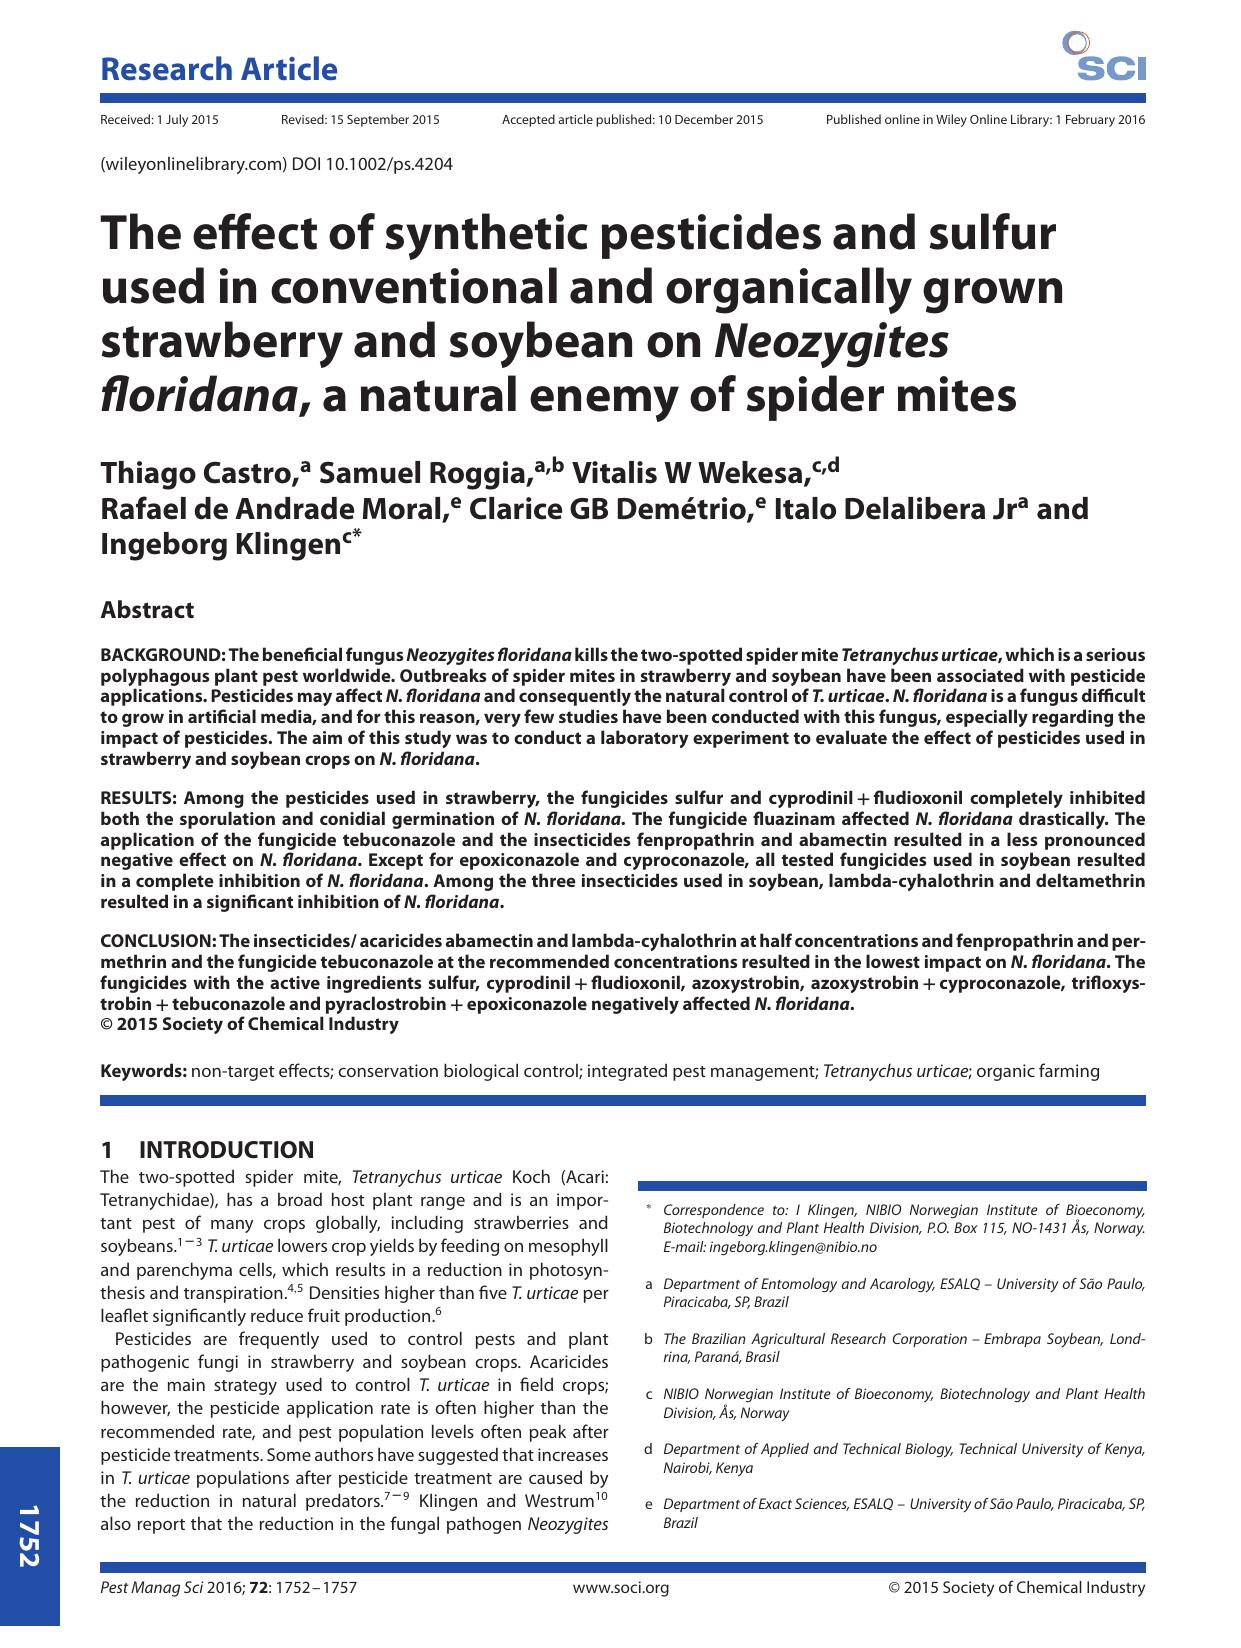 The effect of synthetic pesticides and sulfur used in conventional and organically grown strawberry and soybean on Neozygites floridana, a natural enemy of spider mites by Unknown